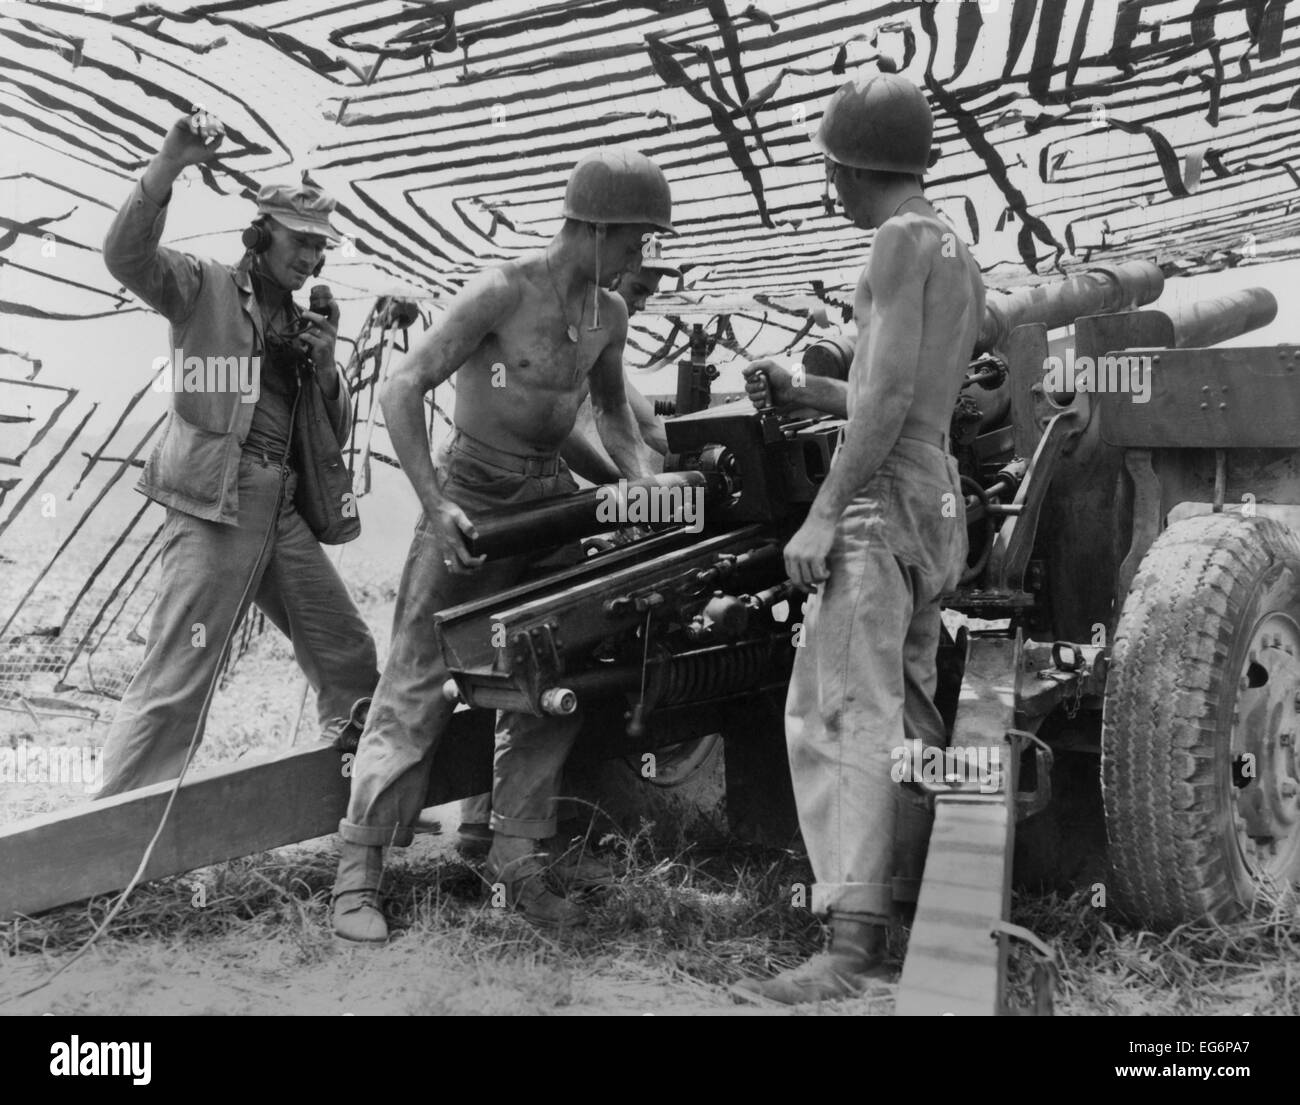 Four soldiers man U.S. Army 105 mm. artillery under a camouflage net in ...